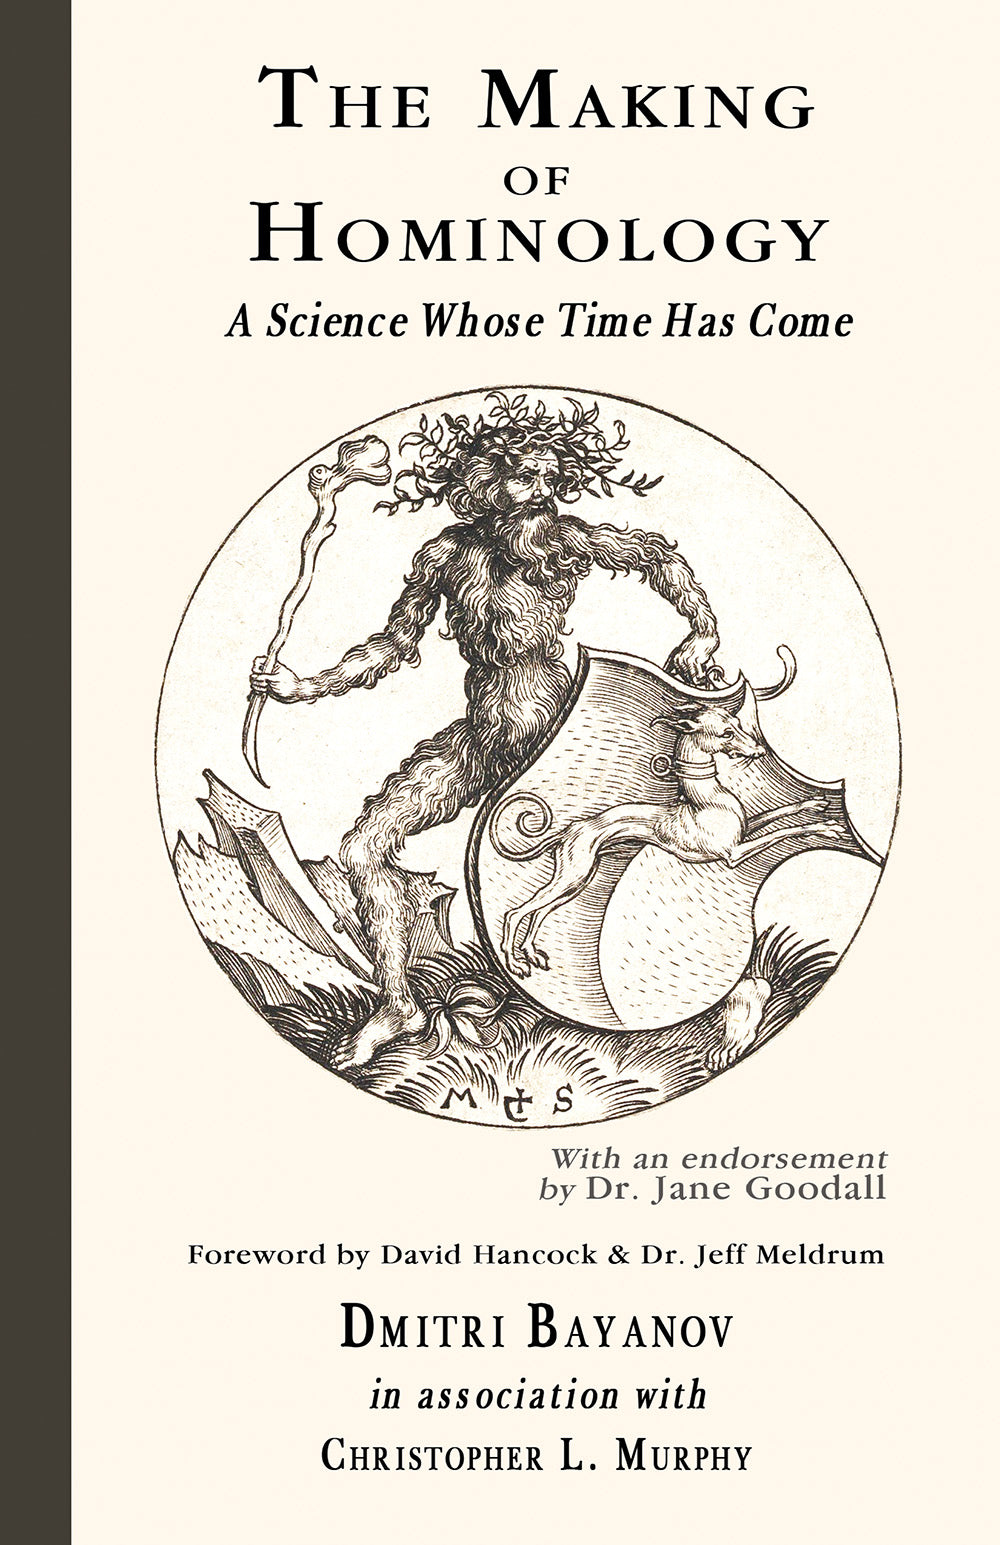 The Making of Hominology: a science whose time has come